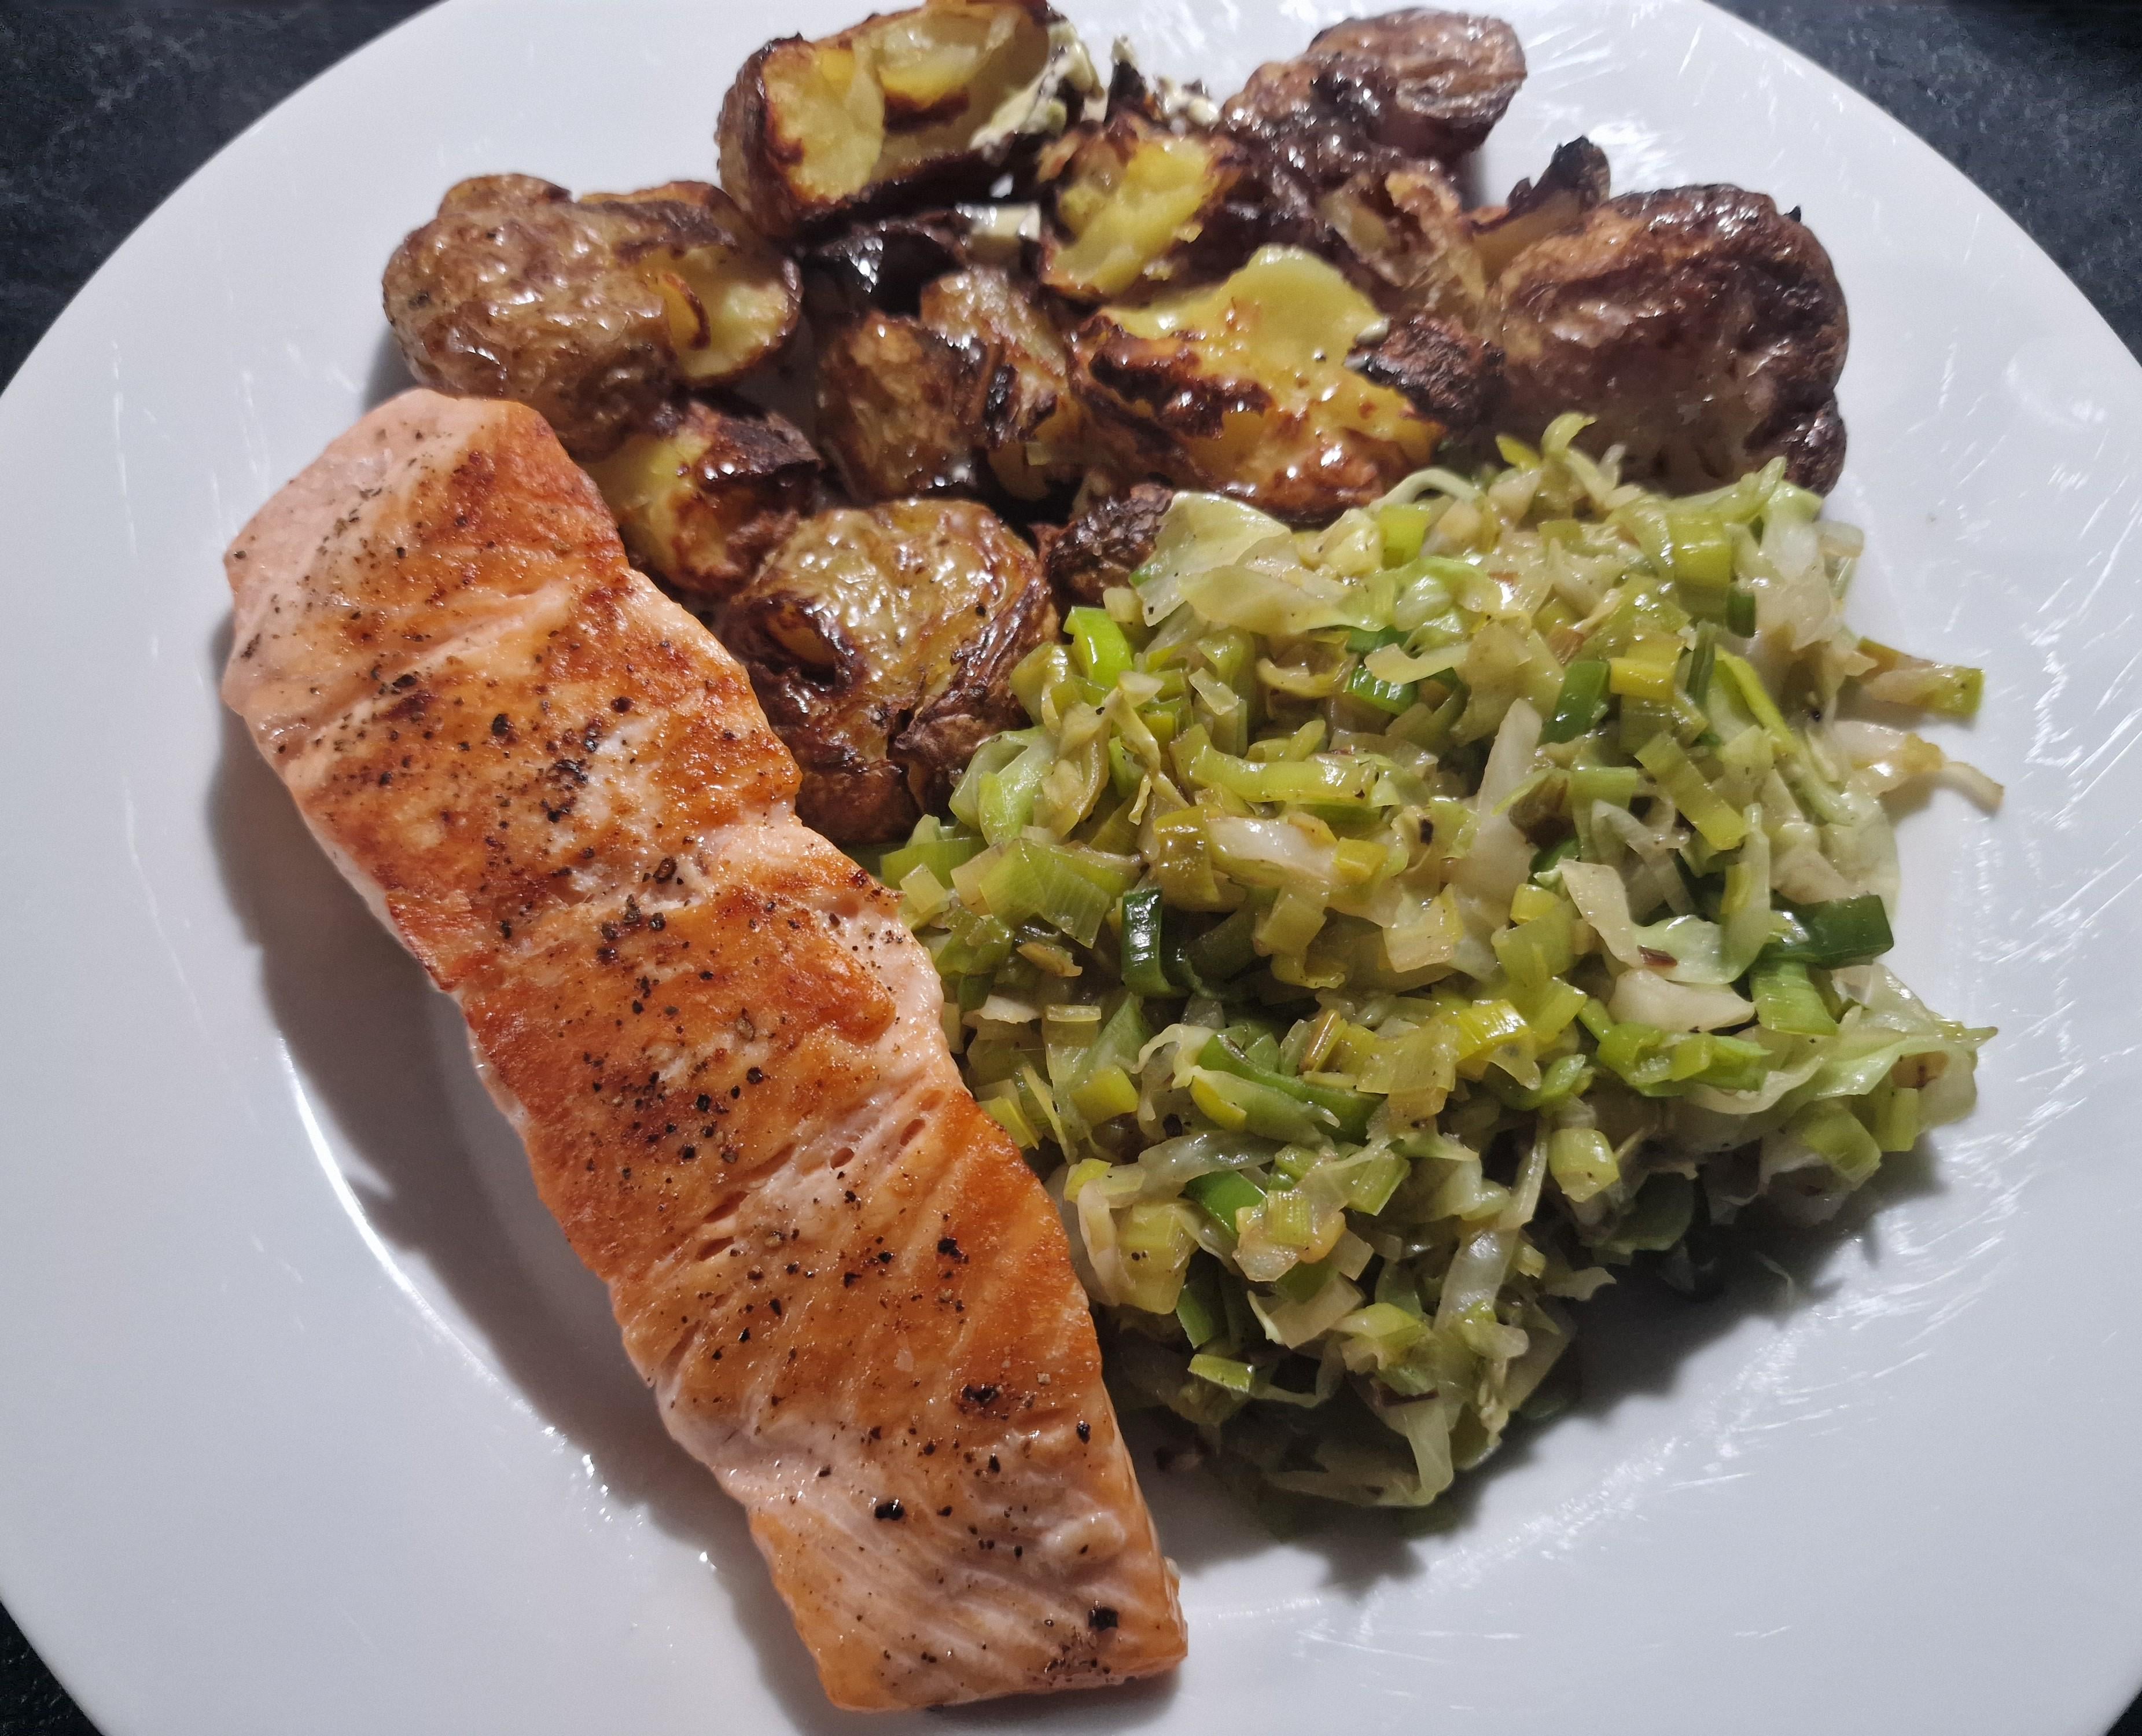 Salmon, fried leek and cabbage, roasted mini potatoes - Dining and Cooking